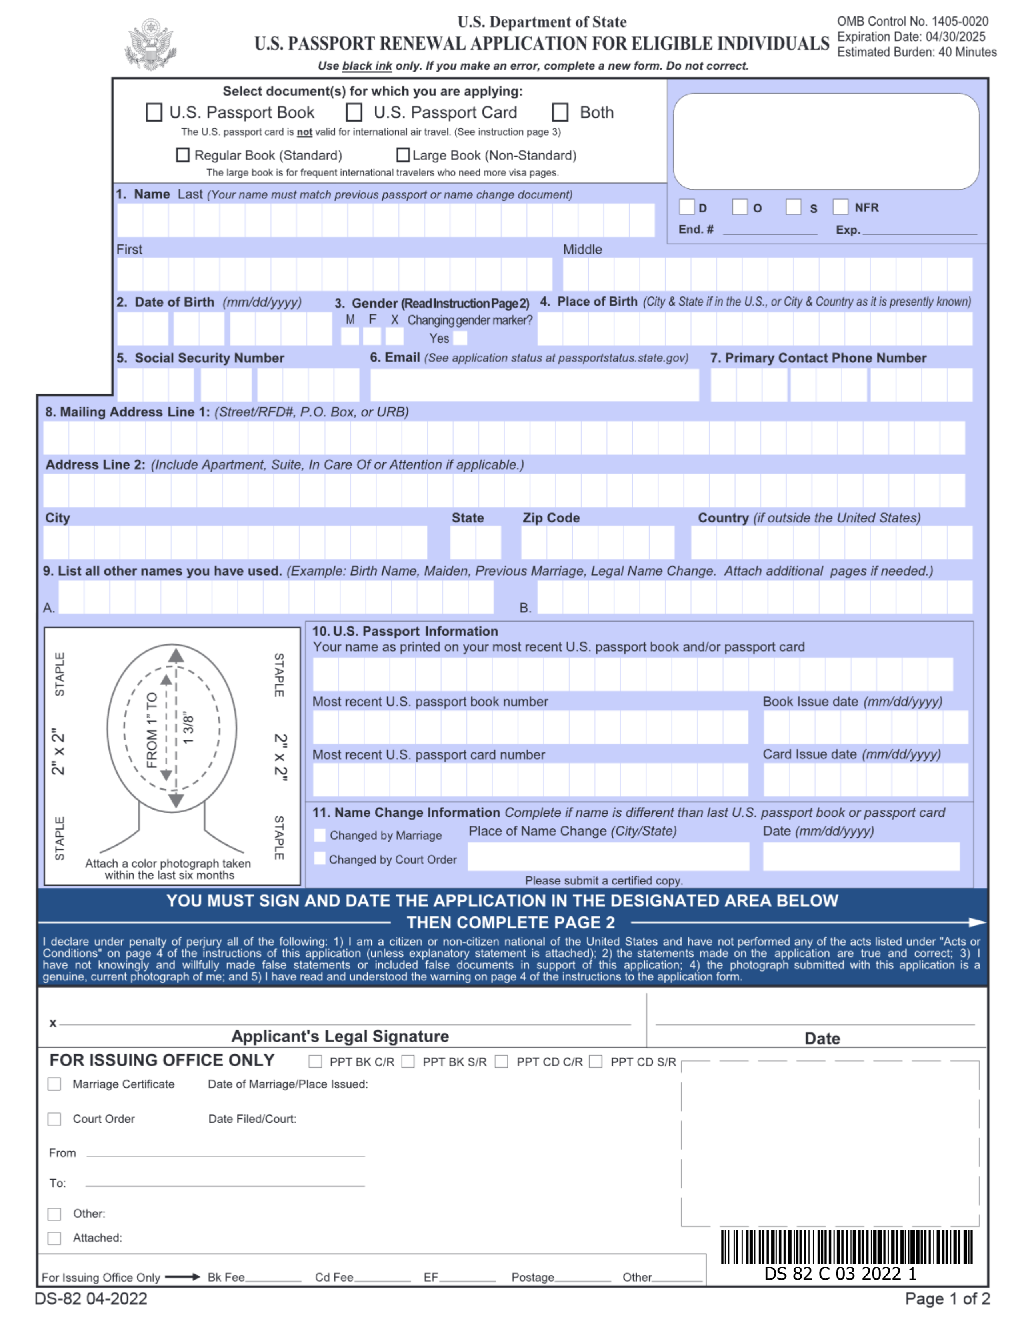 renewal-application-for-a-us-passport-ds-82-forms-docs-2023